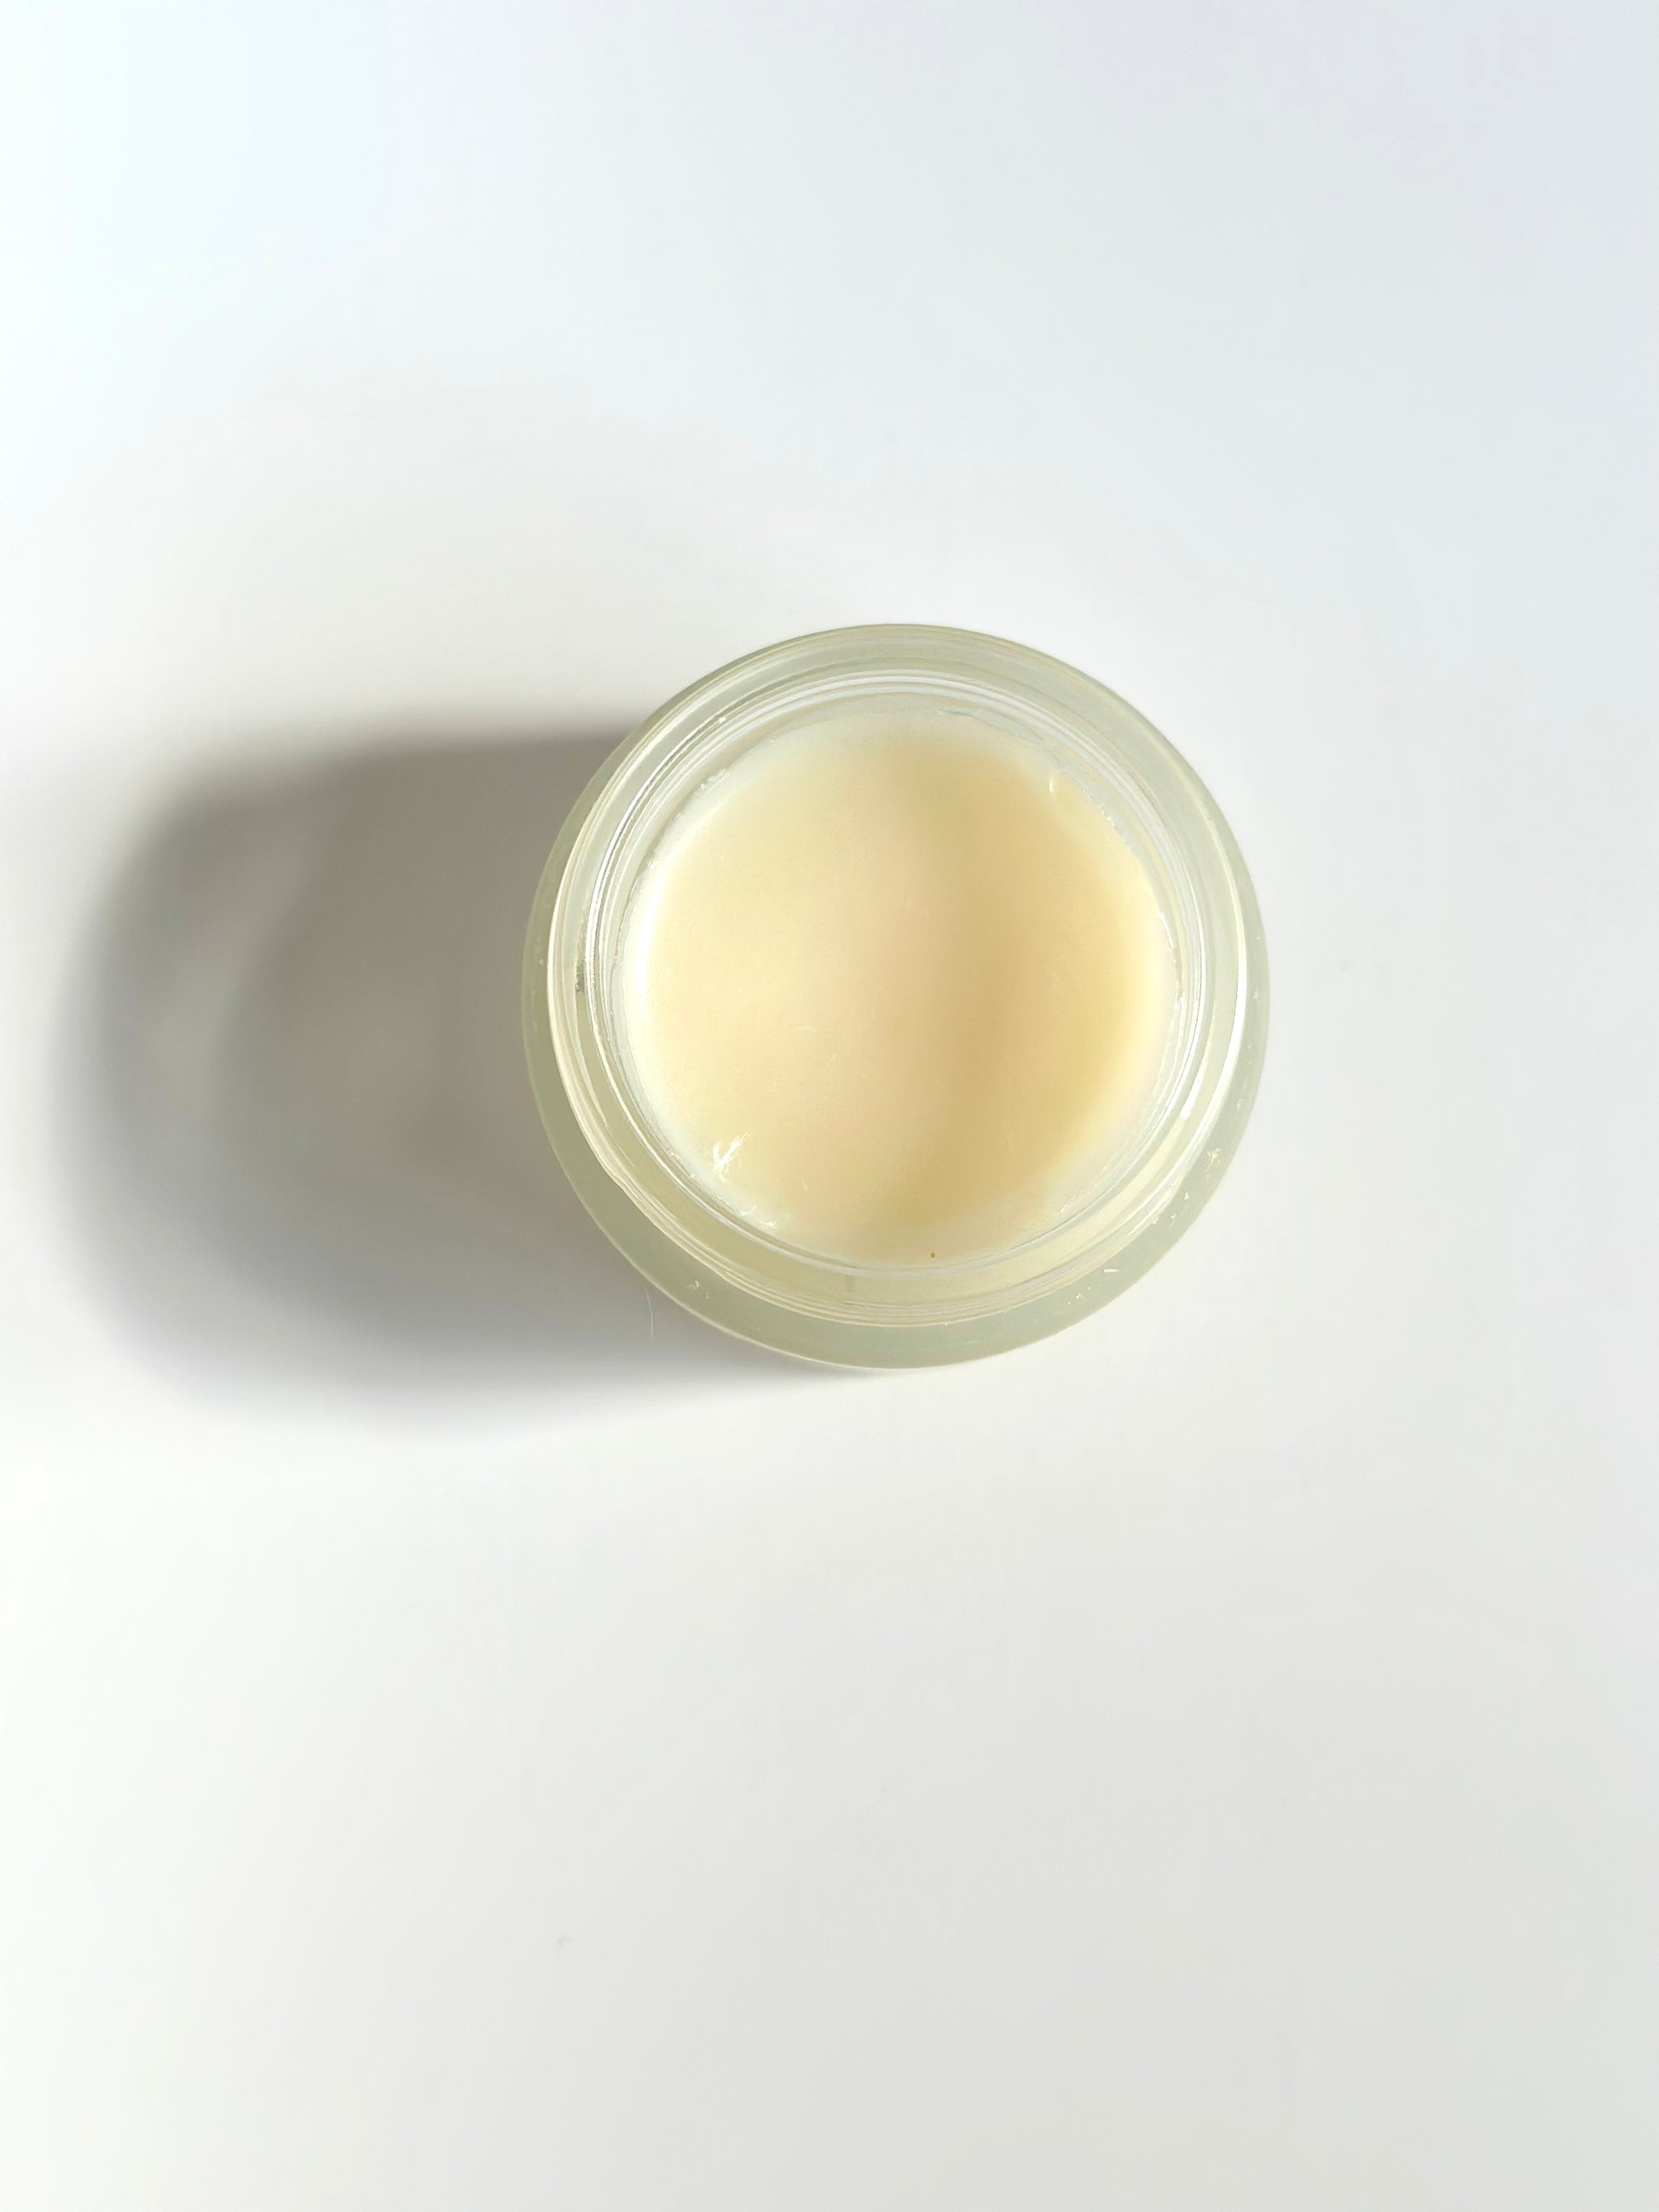 massage balm handmade with organic ingredients. Brings warmth and circulation to the uterus